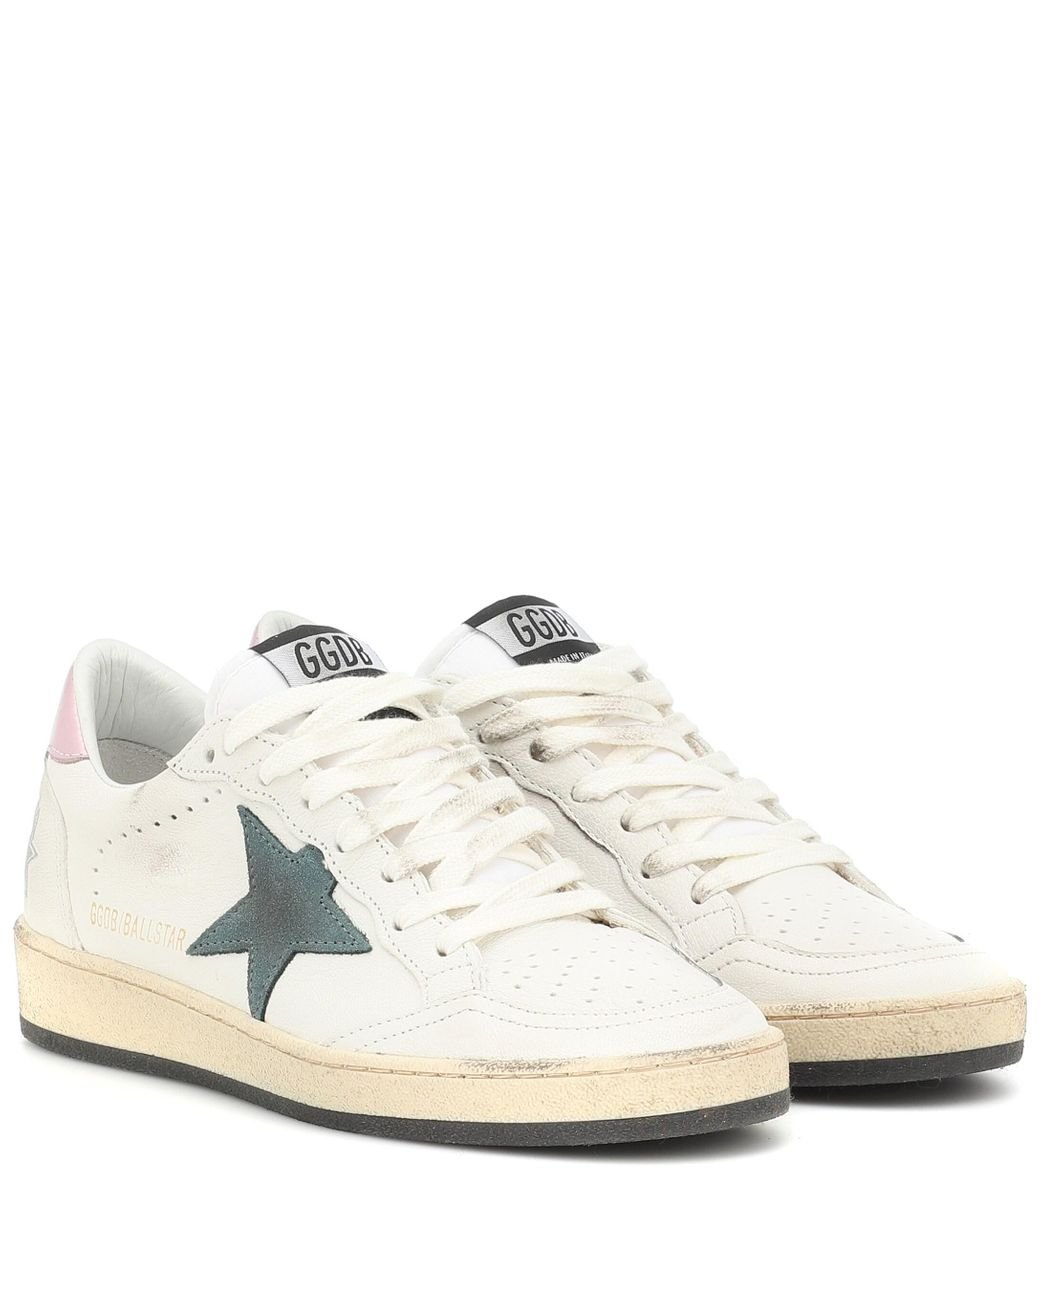 Golden Goose Deluxe Brand Ball Star Leather Sneakers in White - Lyst